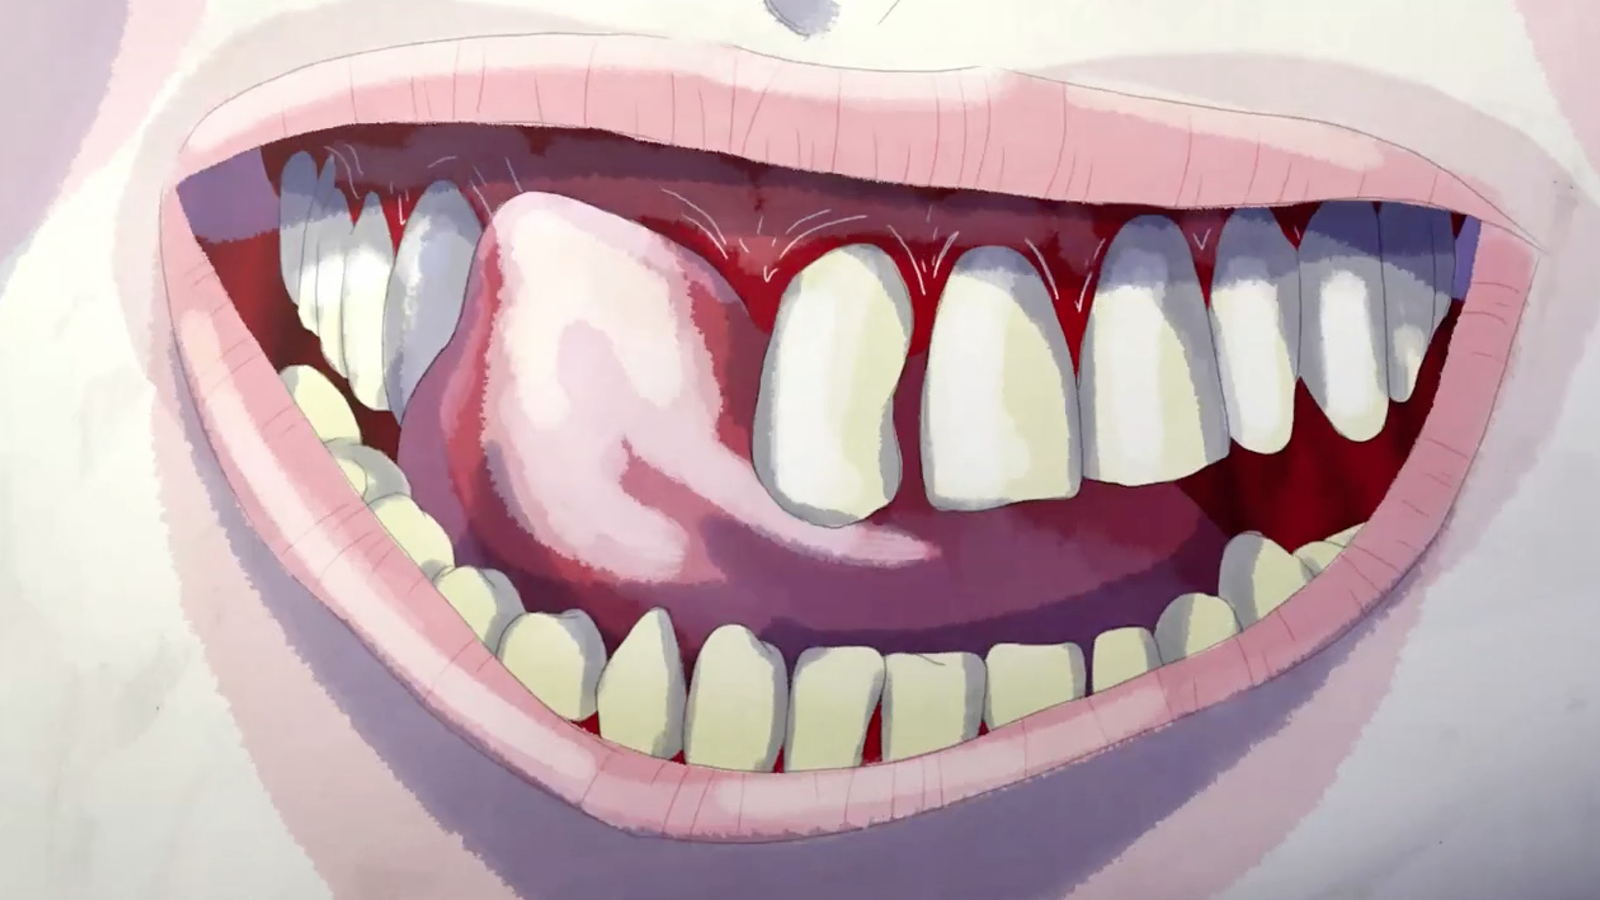 Why do anime characters usually have no individual teeth? Instead having  just a white line? - Forums - MyAnimeList.net